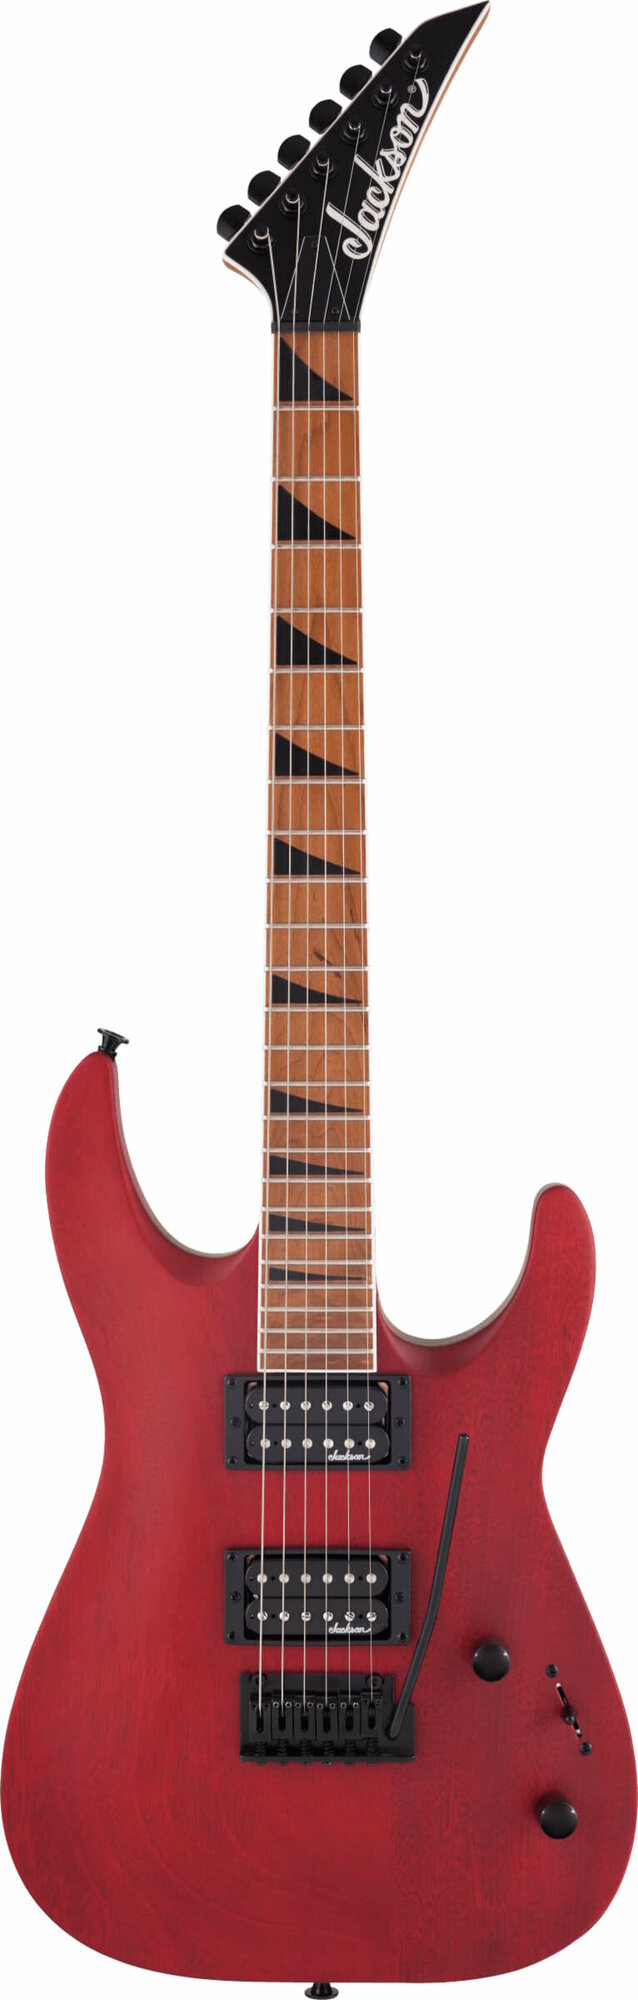 Электрогитара Jackson Js Series Dinky Arch Top Js24 Dkam Caramelized Maple Fingerboard Red Stain